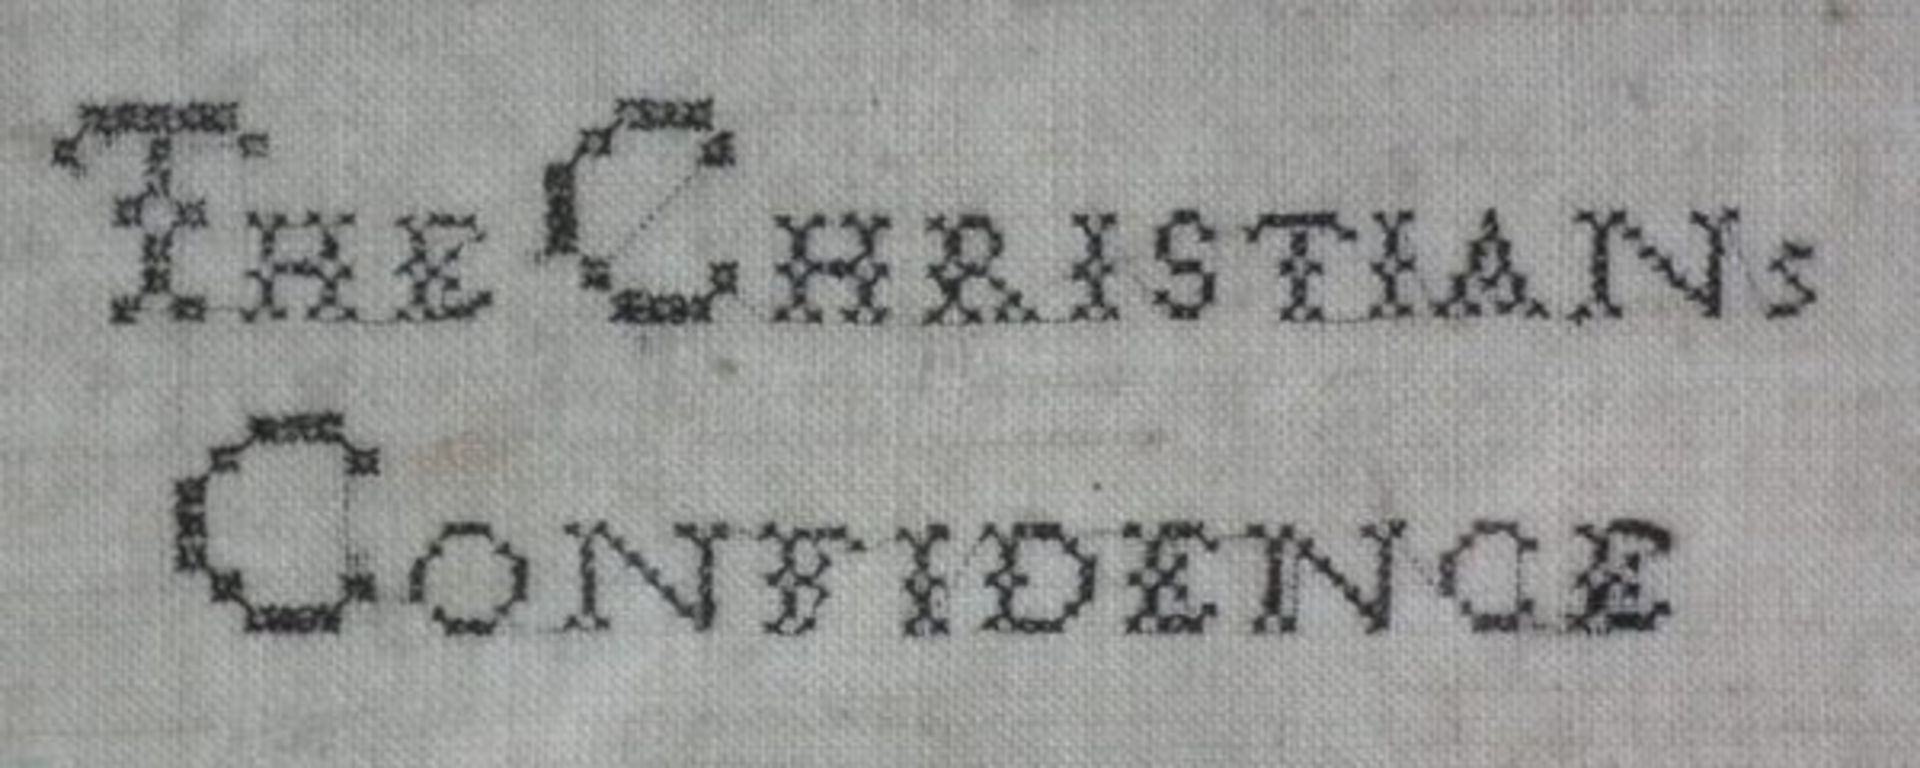 Irish Needlework Sampler dated 1832 by Mary Anne Enright FREE UK DELIVERY - Image 9 of 38